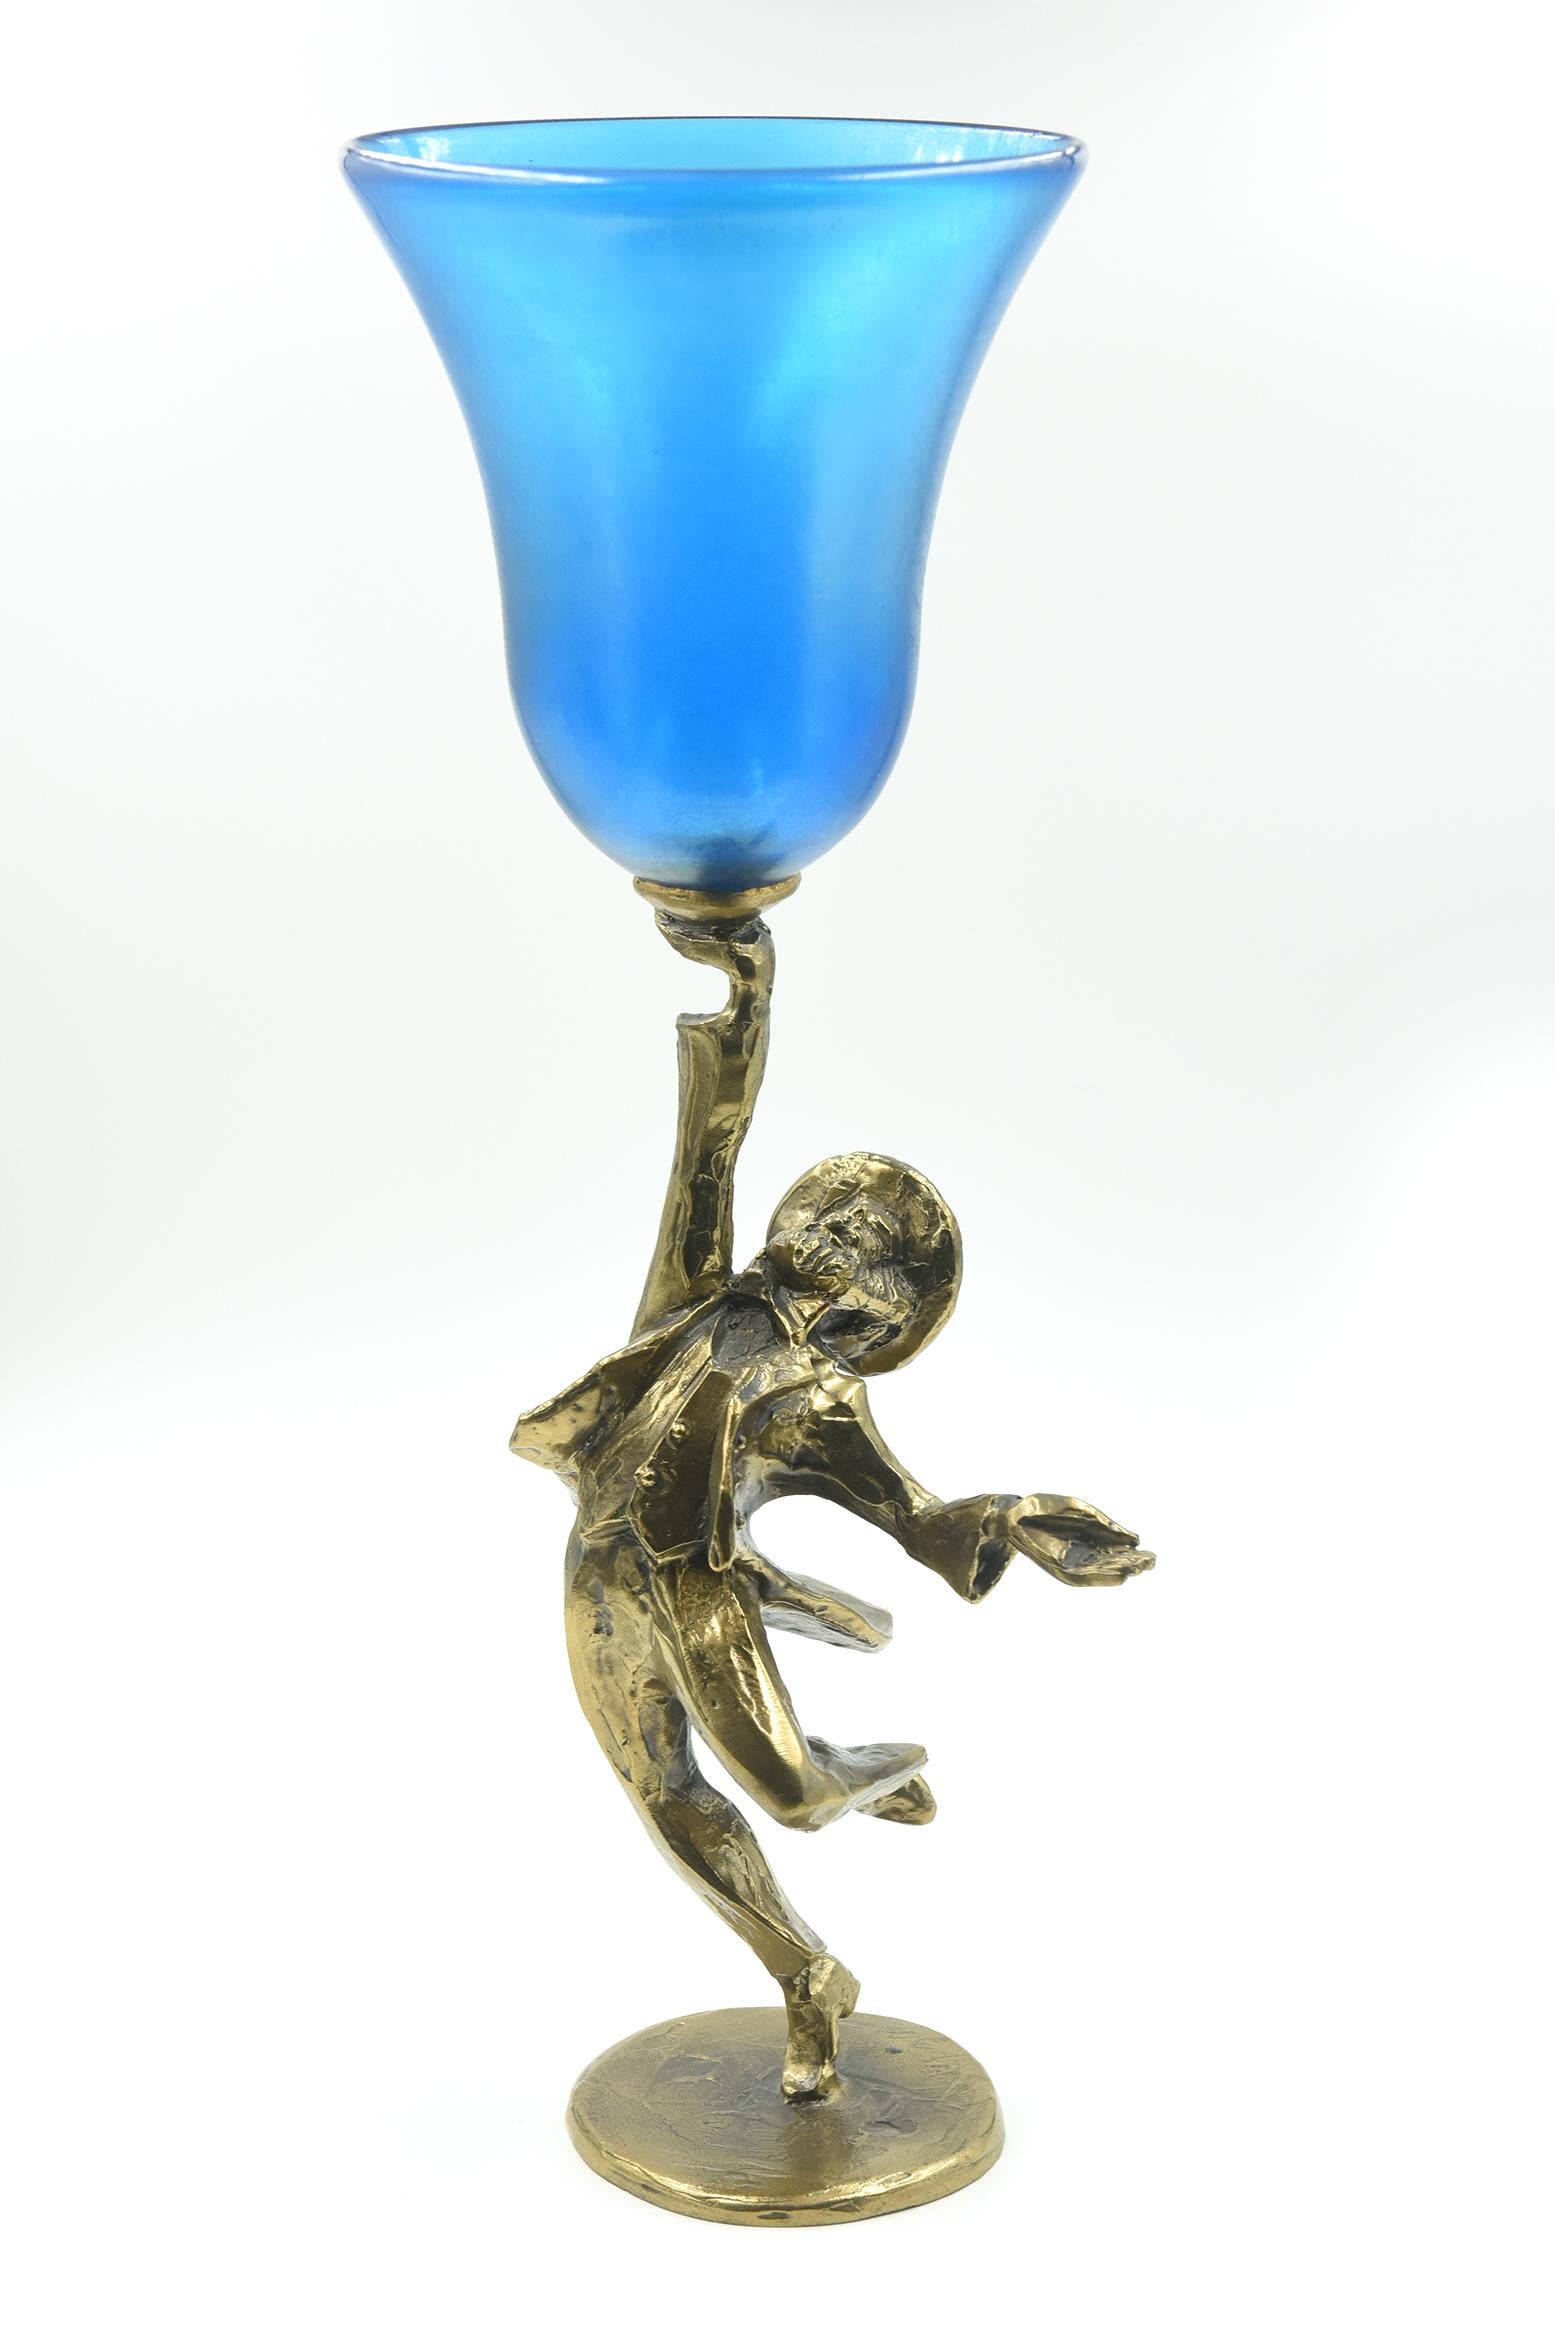 American Bronze and Blue Glass Kiddush Cup by Zachary Oxman